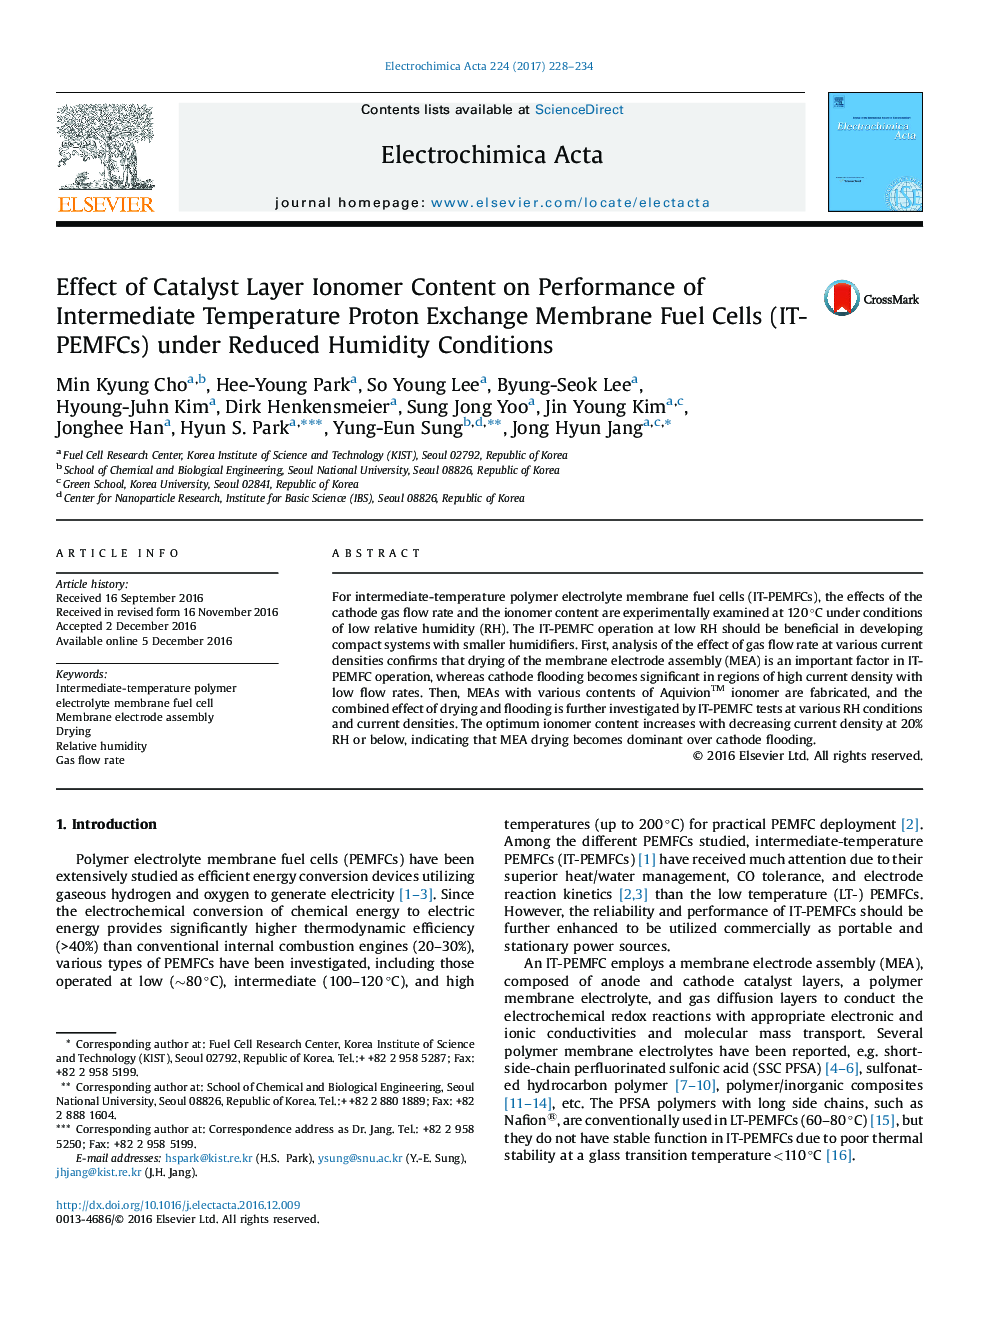 Effect of Catalyst Layer Ionomer Content on Performance of Intermediate Temperature Proton Exchange Membrane Fuel Cells (IT-PEMFCs) under Reduced Humidity Conditions